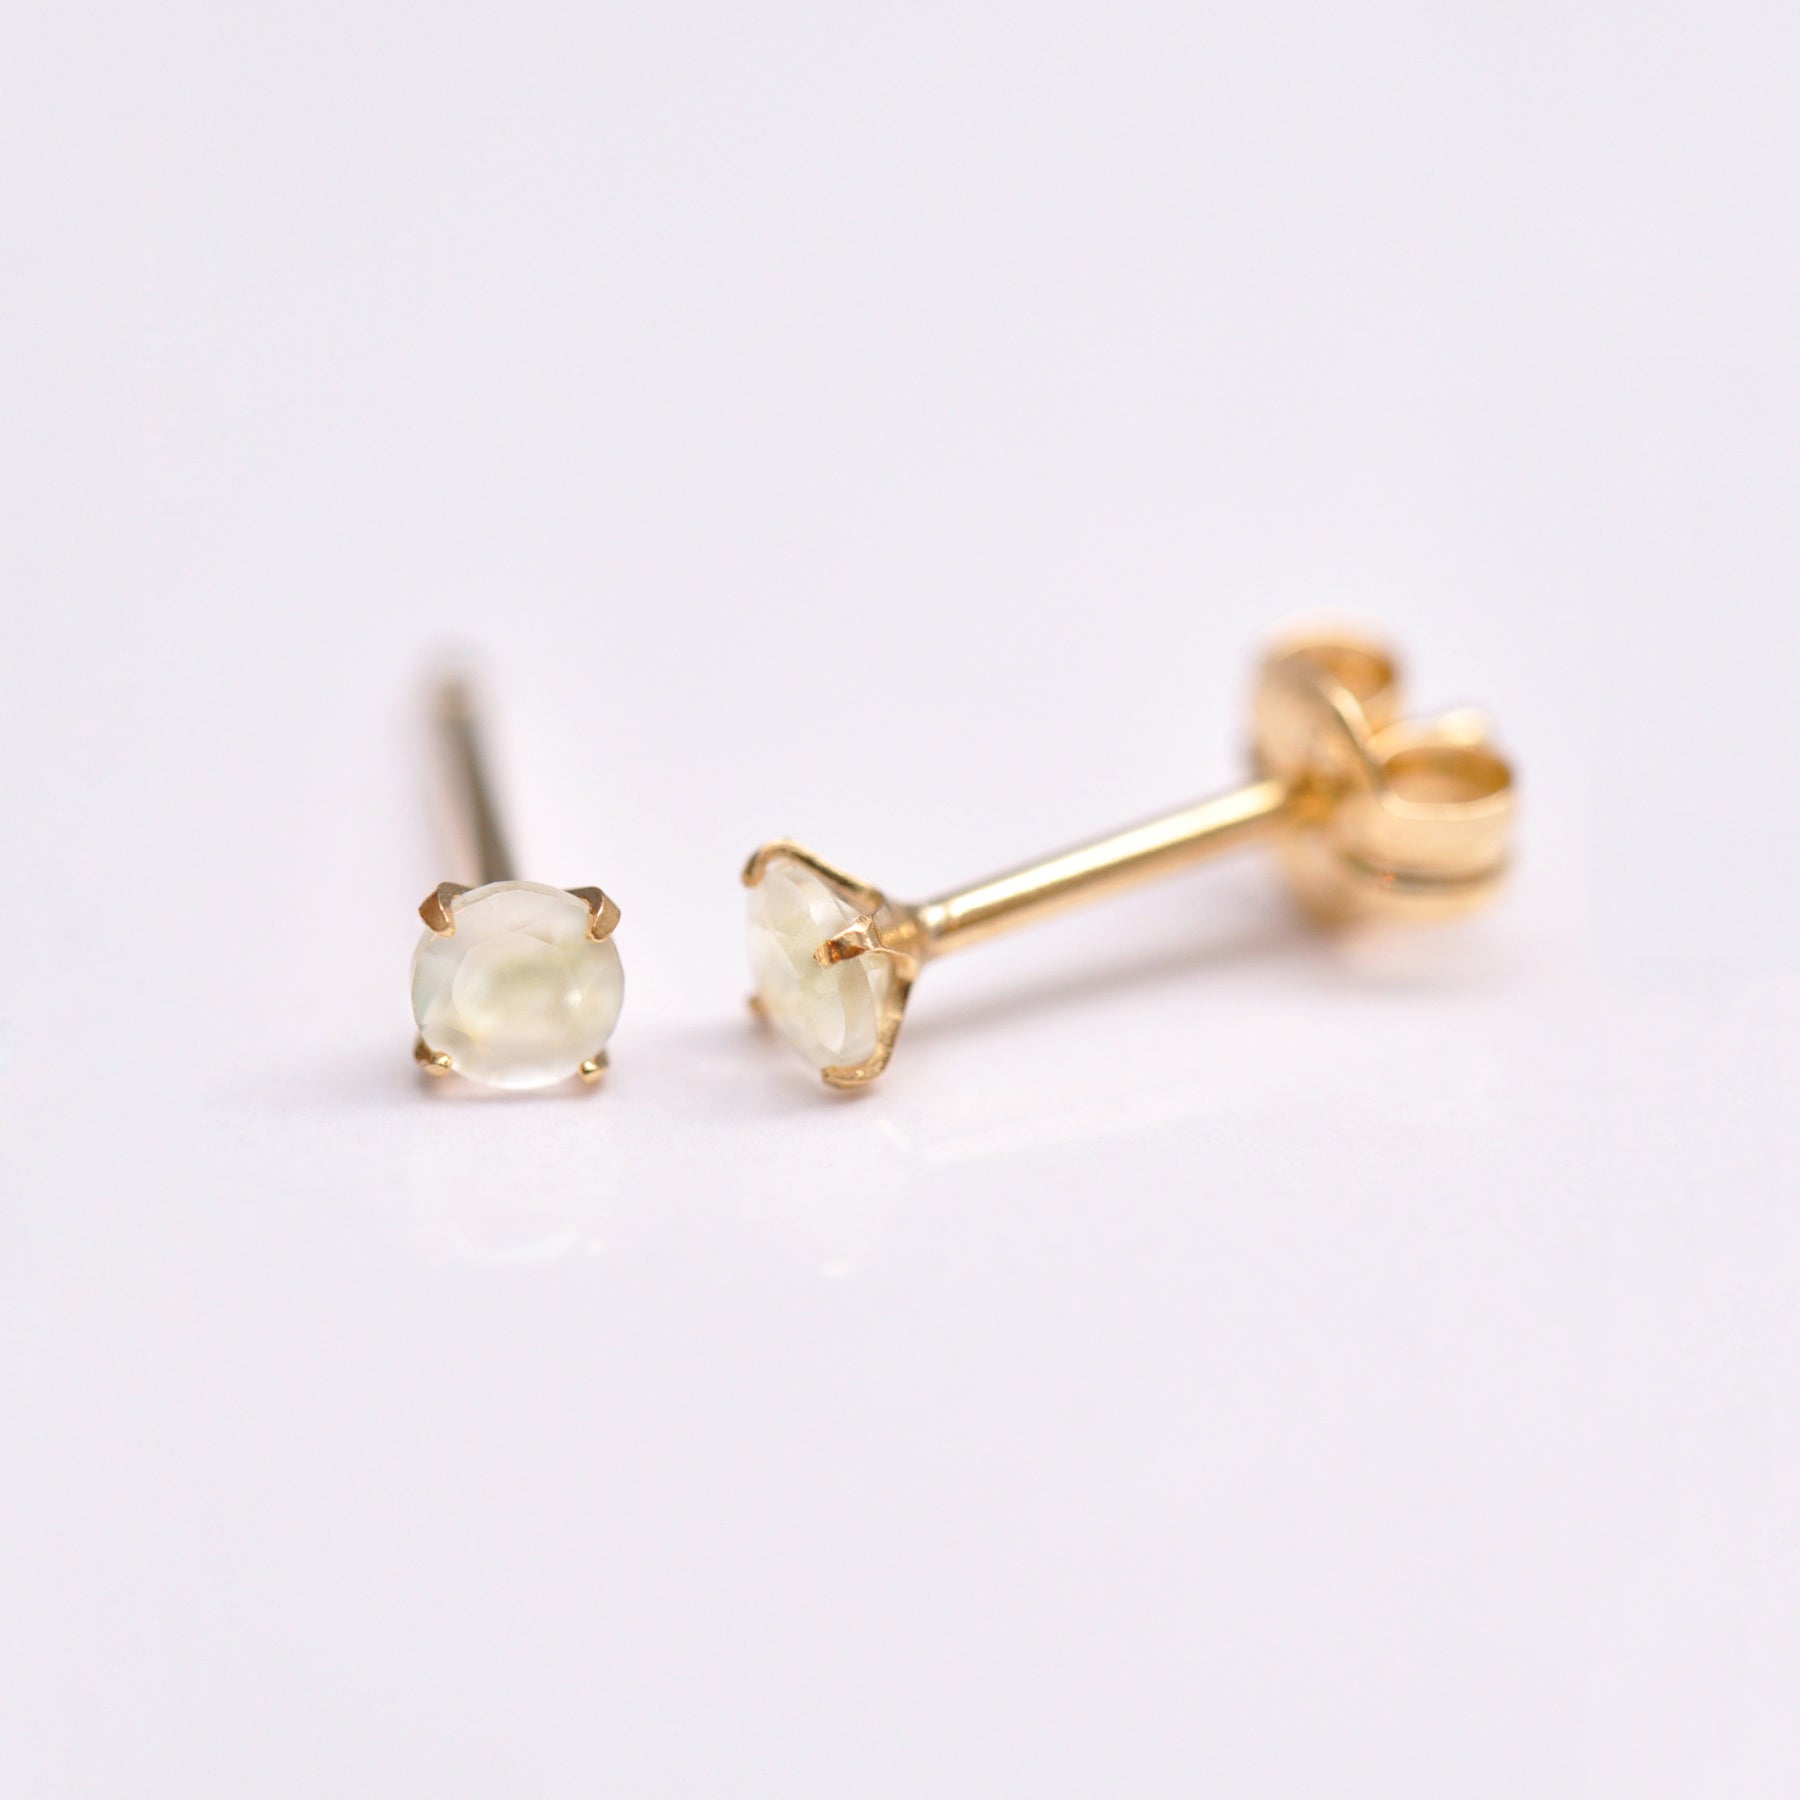 [Second Earrings] 18K Yellow Gold Moonstone Earrings - Product Image